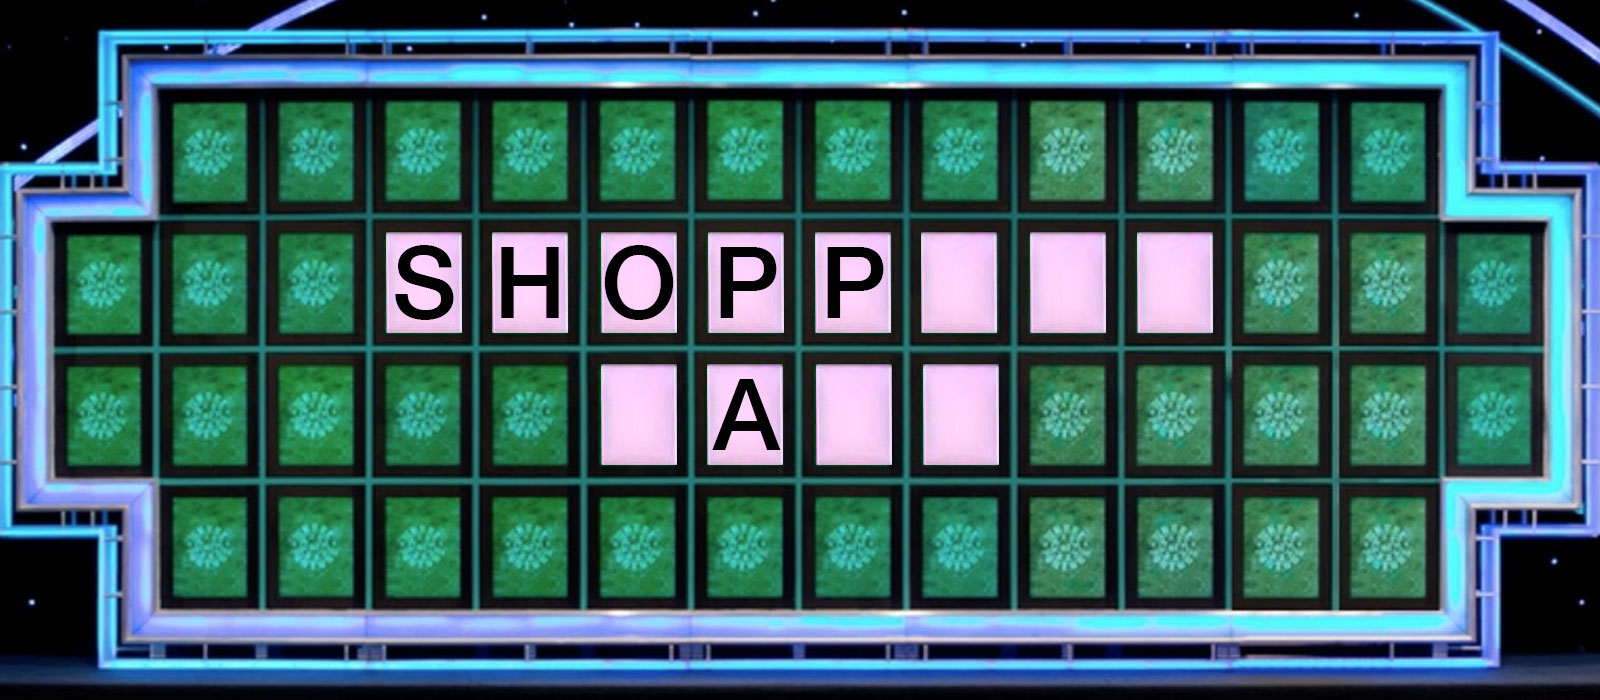 Can You Solve These Wheel of Fortune Puzzles? Quiz 619